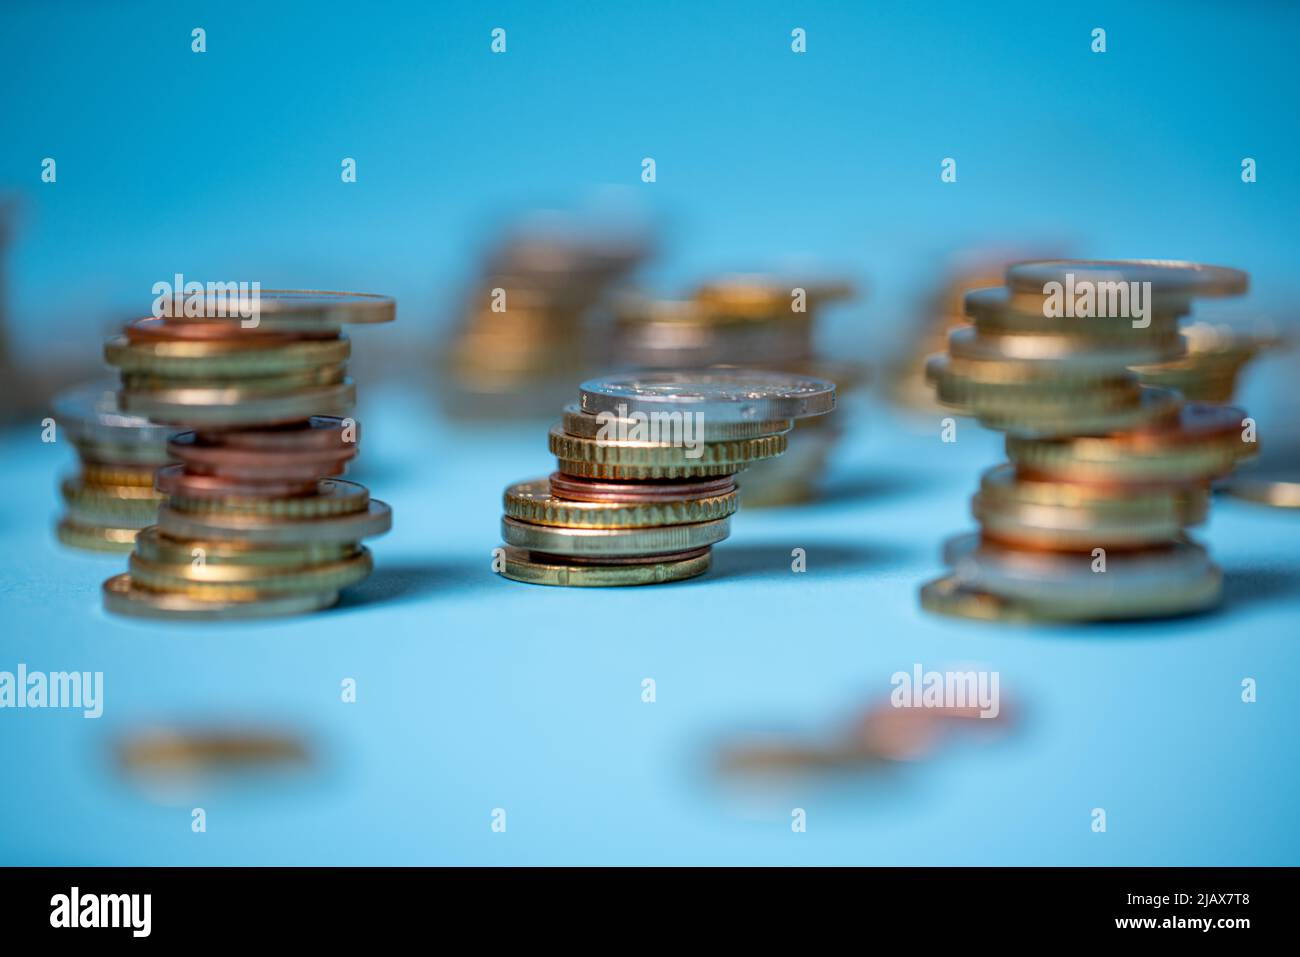 Piled up coins on blue backdrop. Euro coins from European Union. Currency and cash piled up to towers Stock Photo